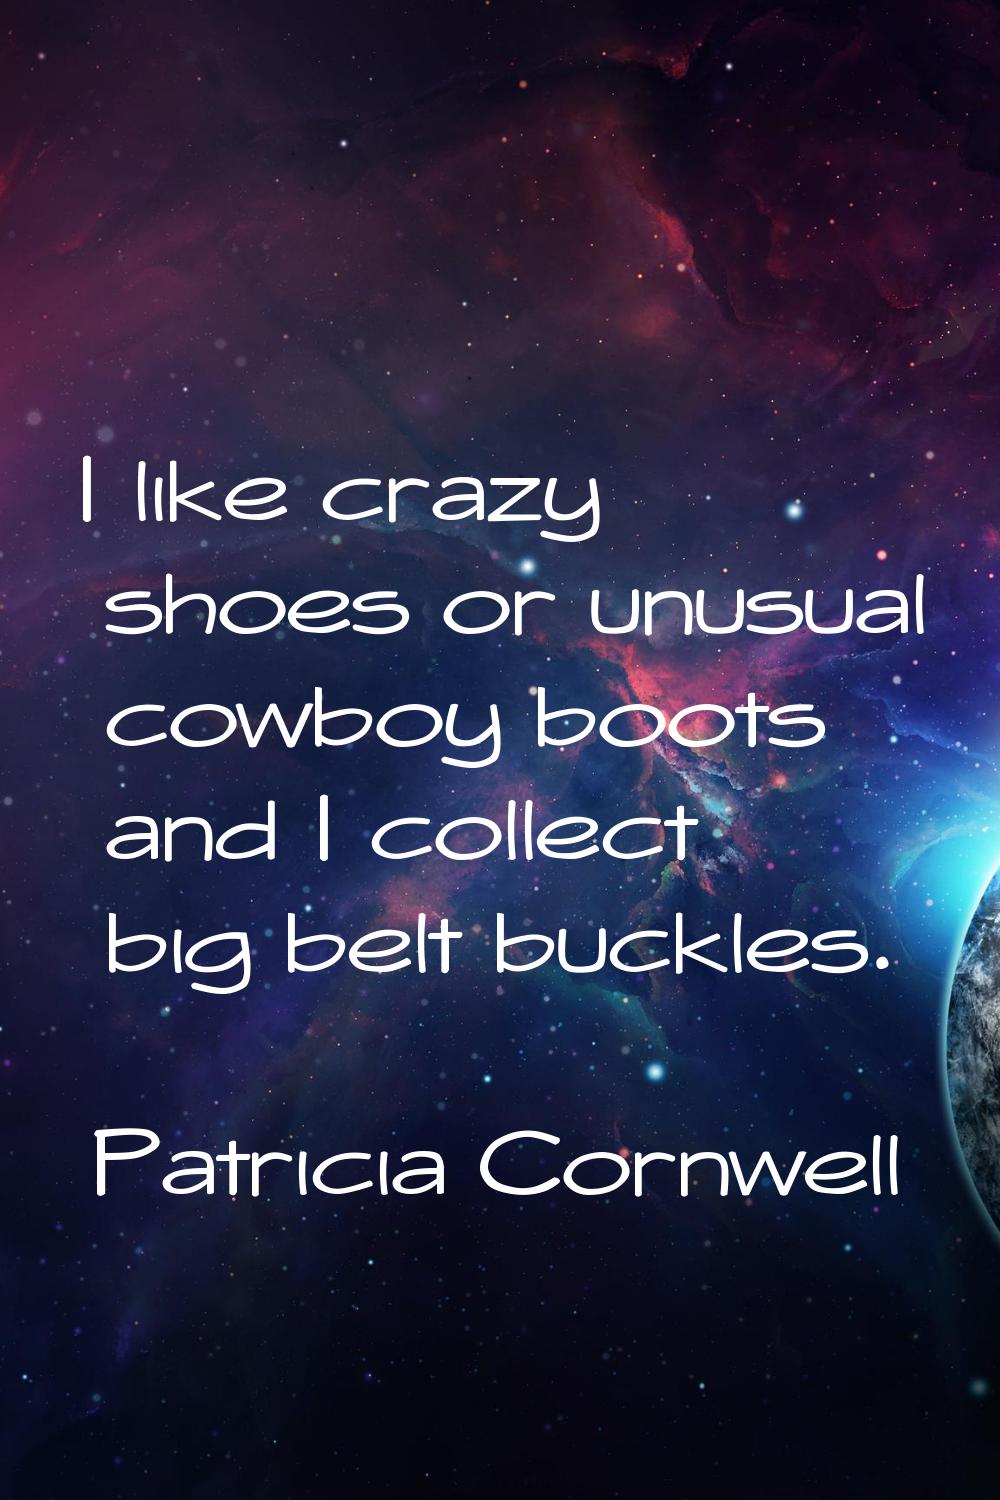 I like crazy shoes or unusual cowboy boots and I collect big belt buckles.